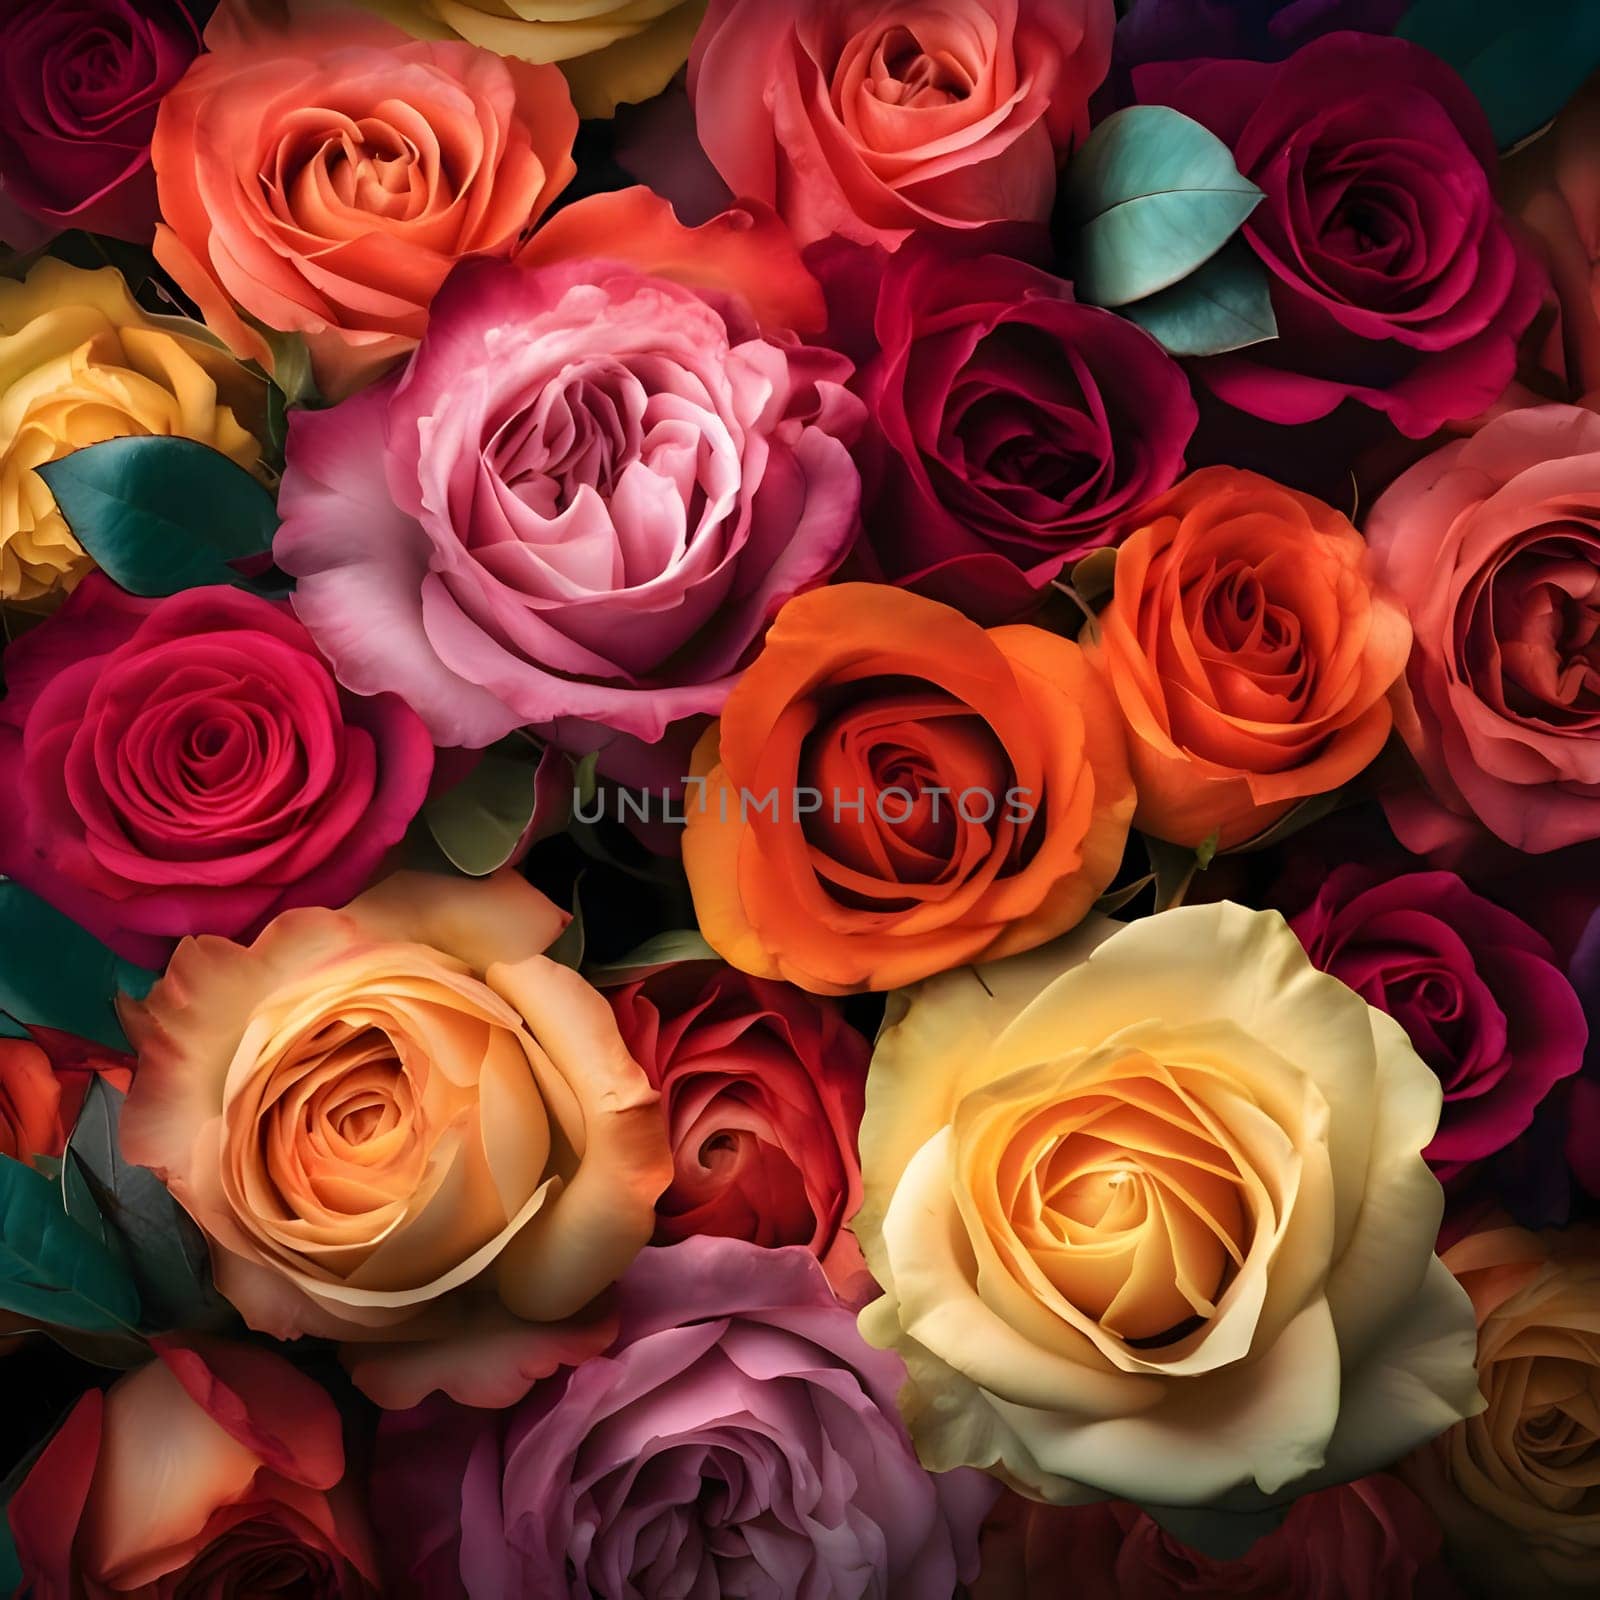 Patterns and banners backgrounds: Colorful roses in a bouquet as a background, top view